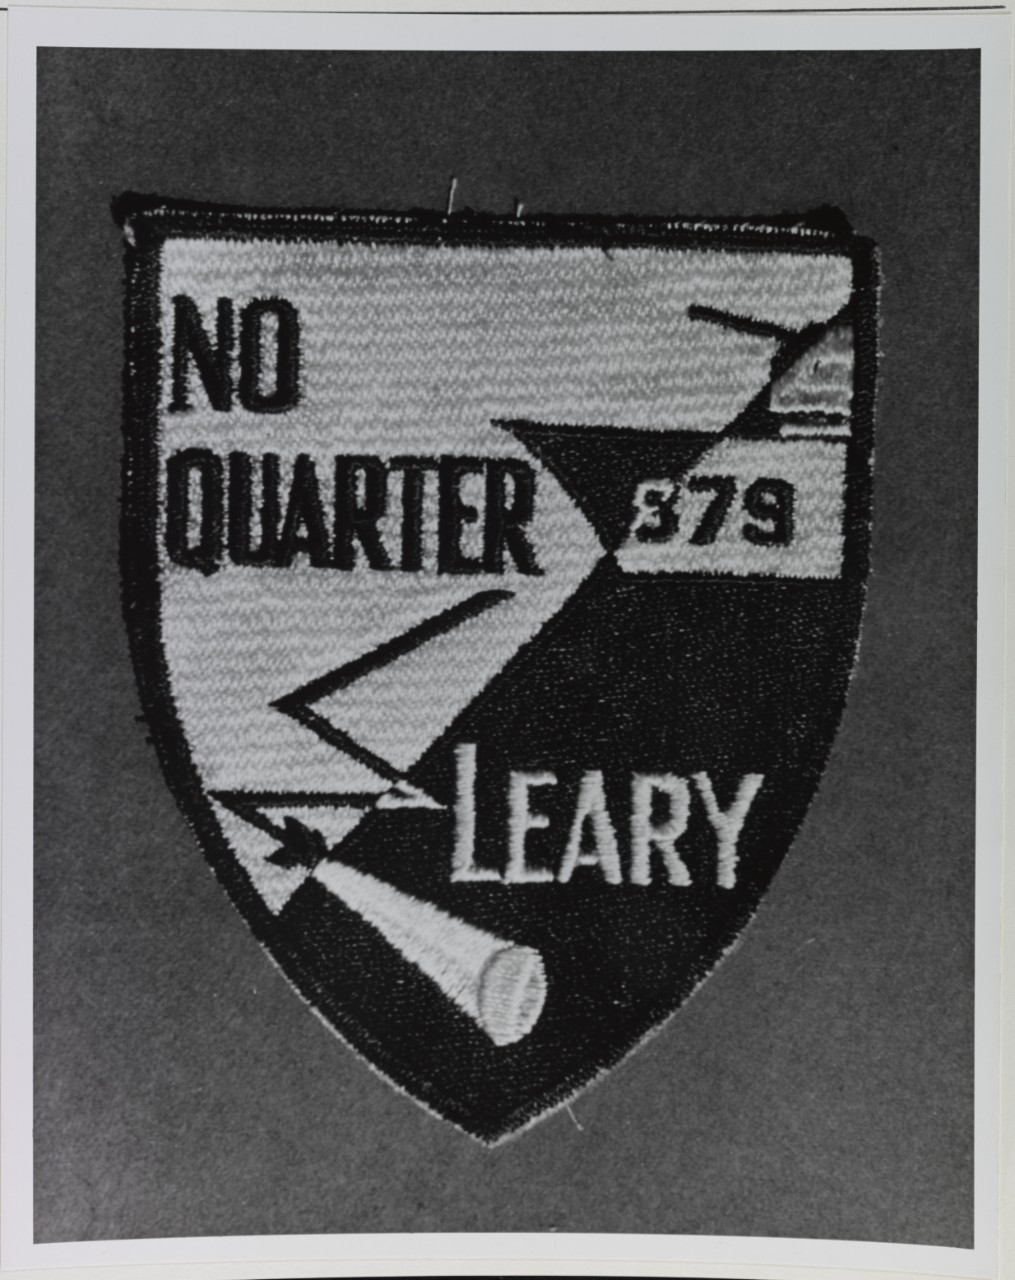 Insignia:  USS LEARY (DDR-879)